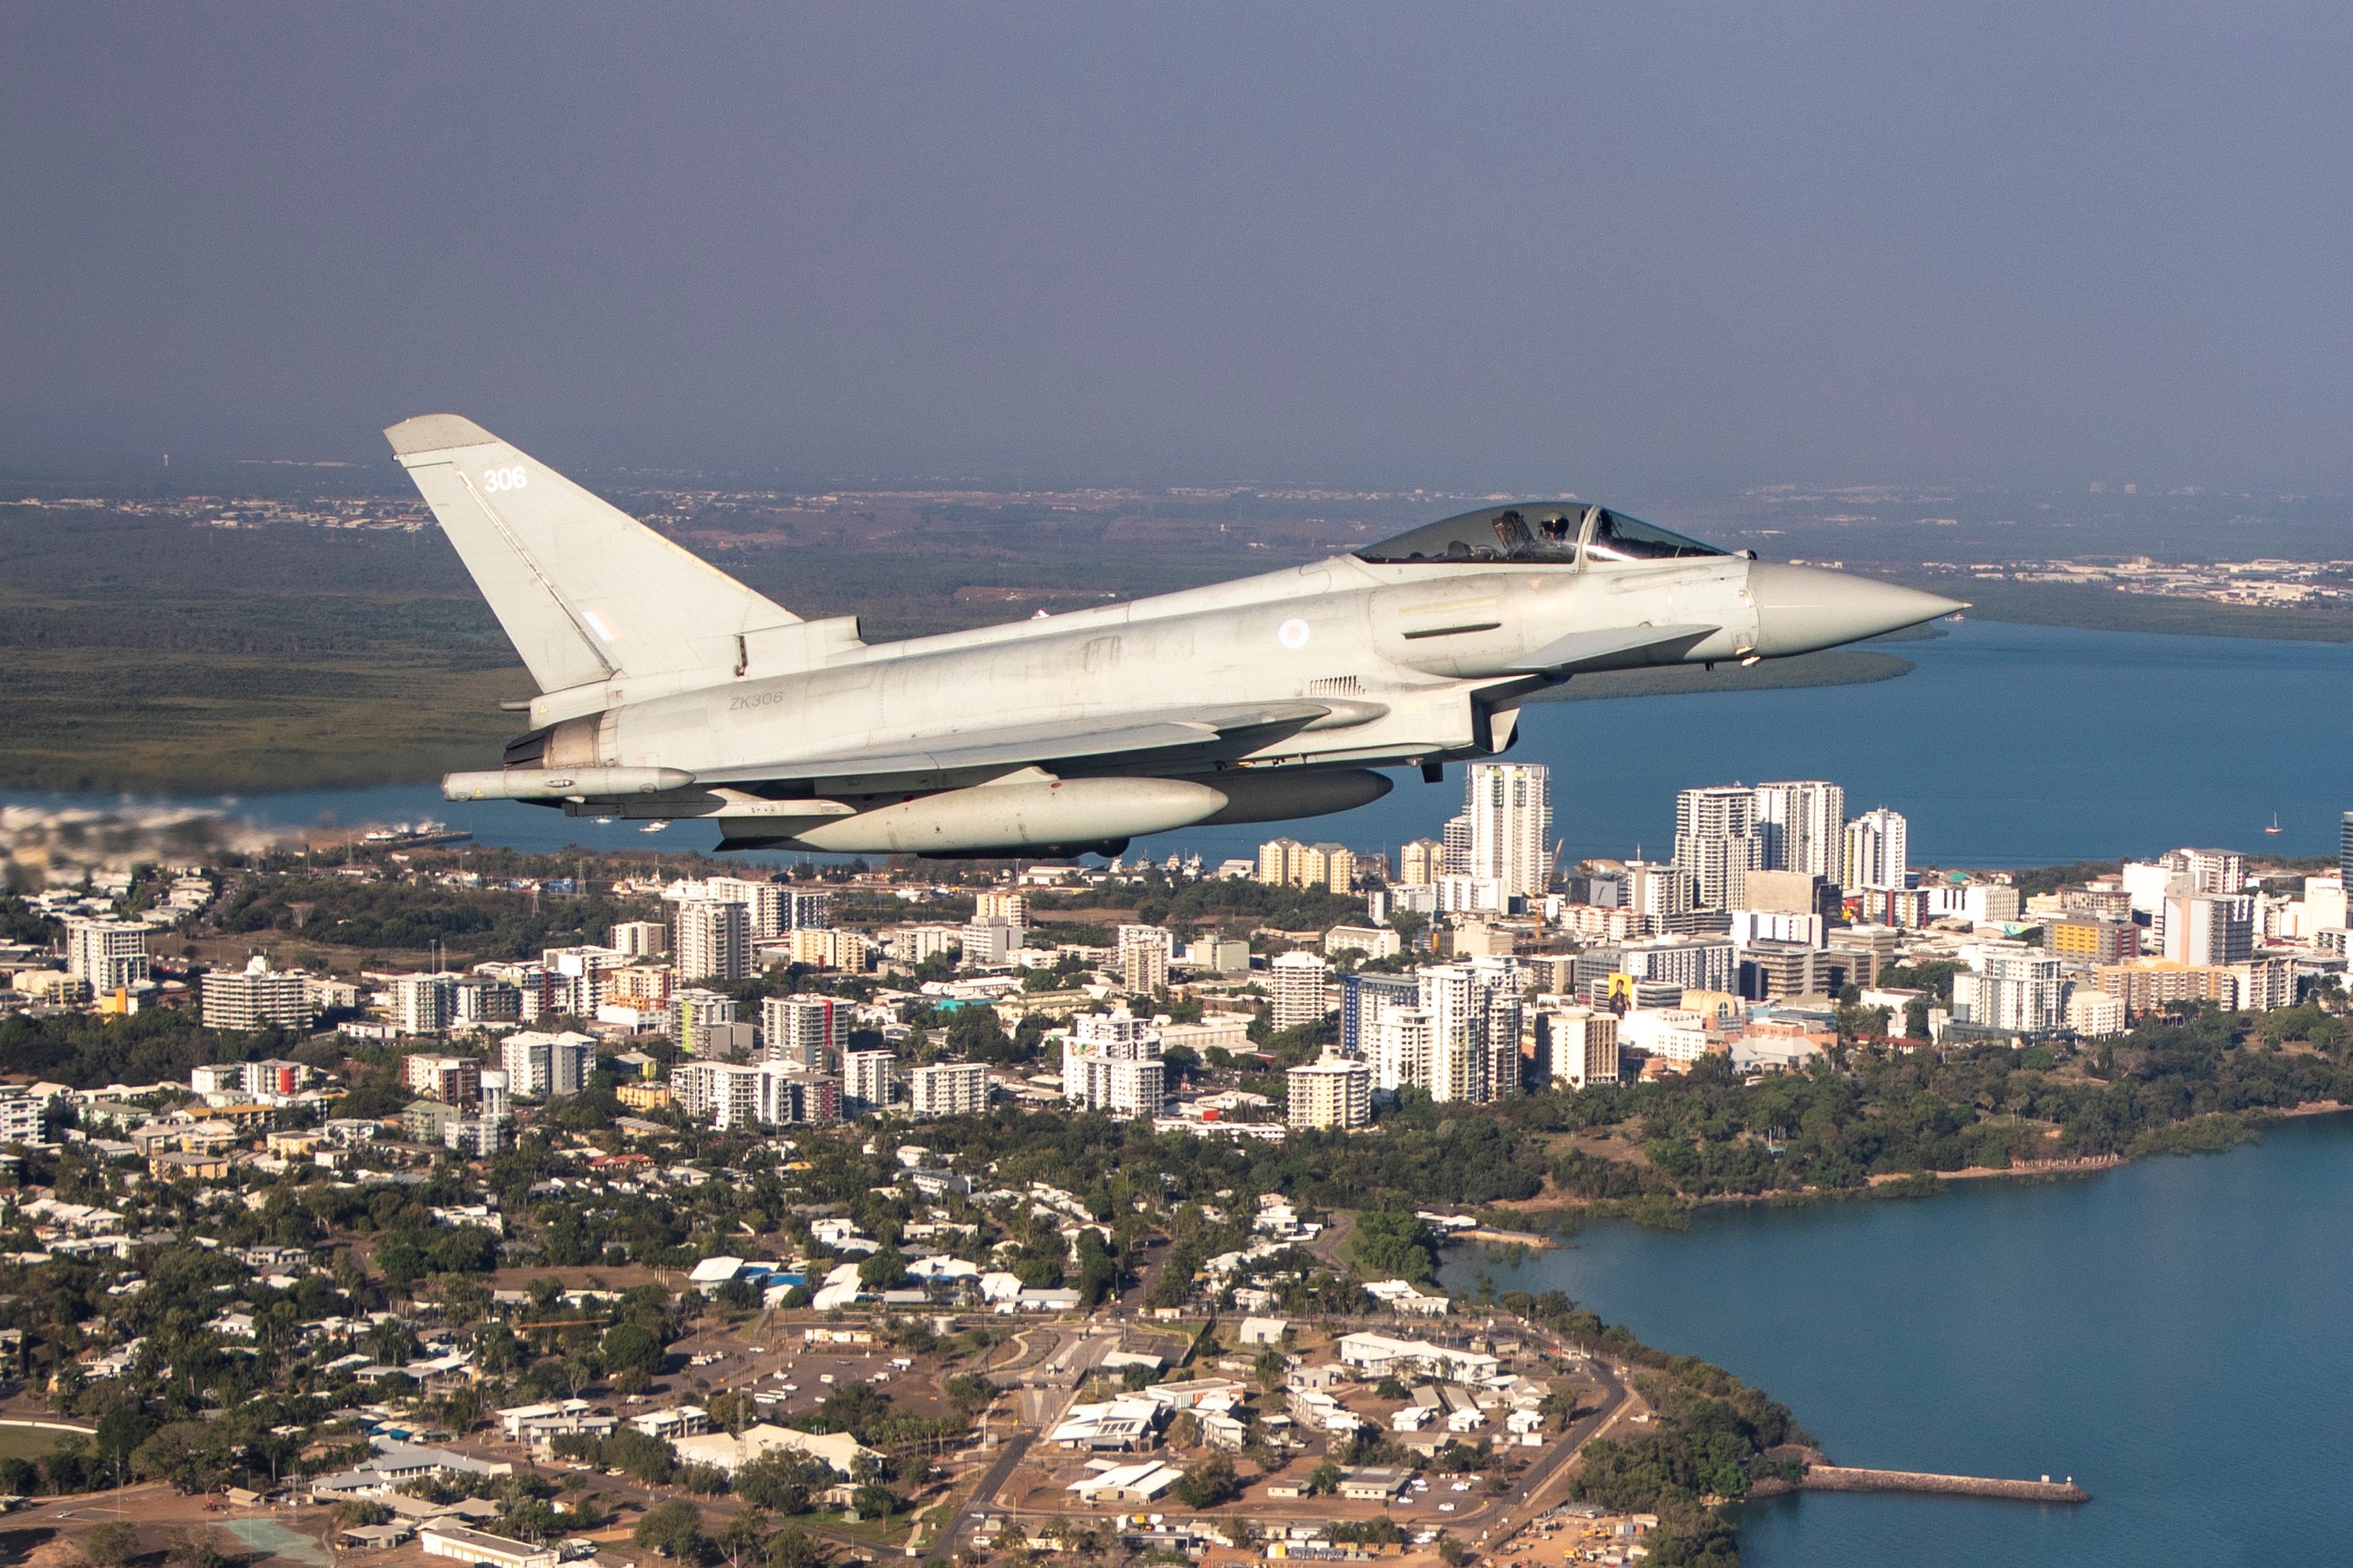 Image of a RAF Typhoon in flight over coastal town.